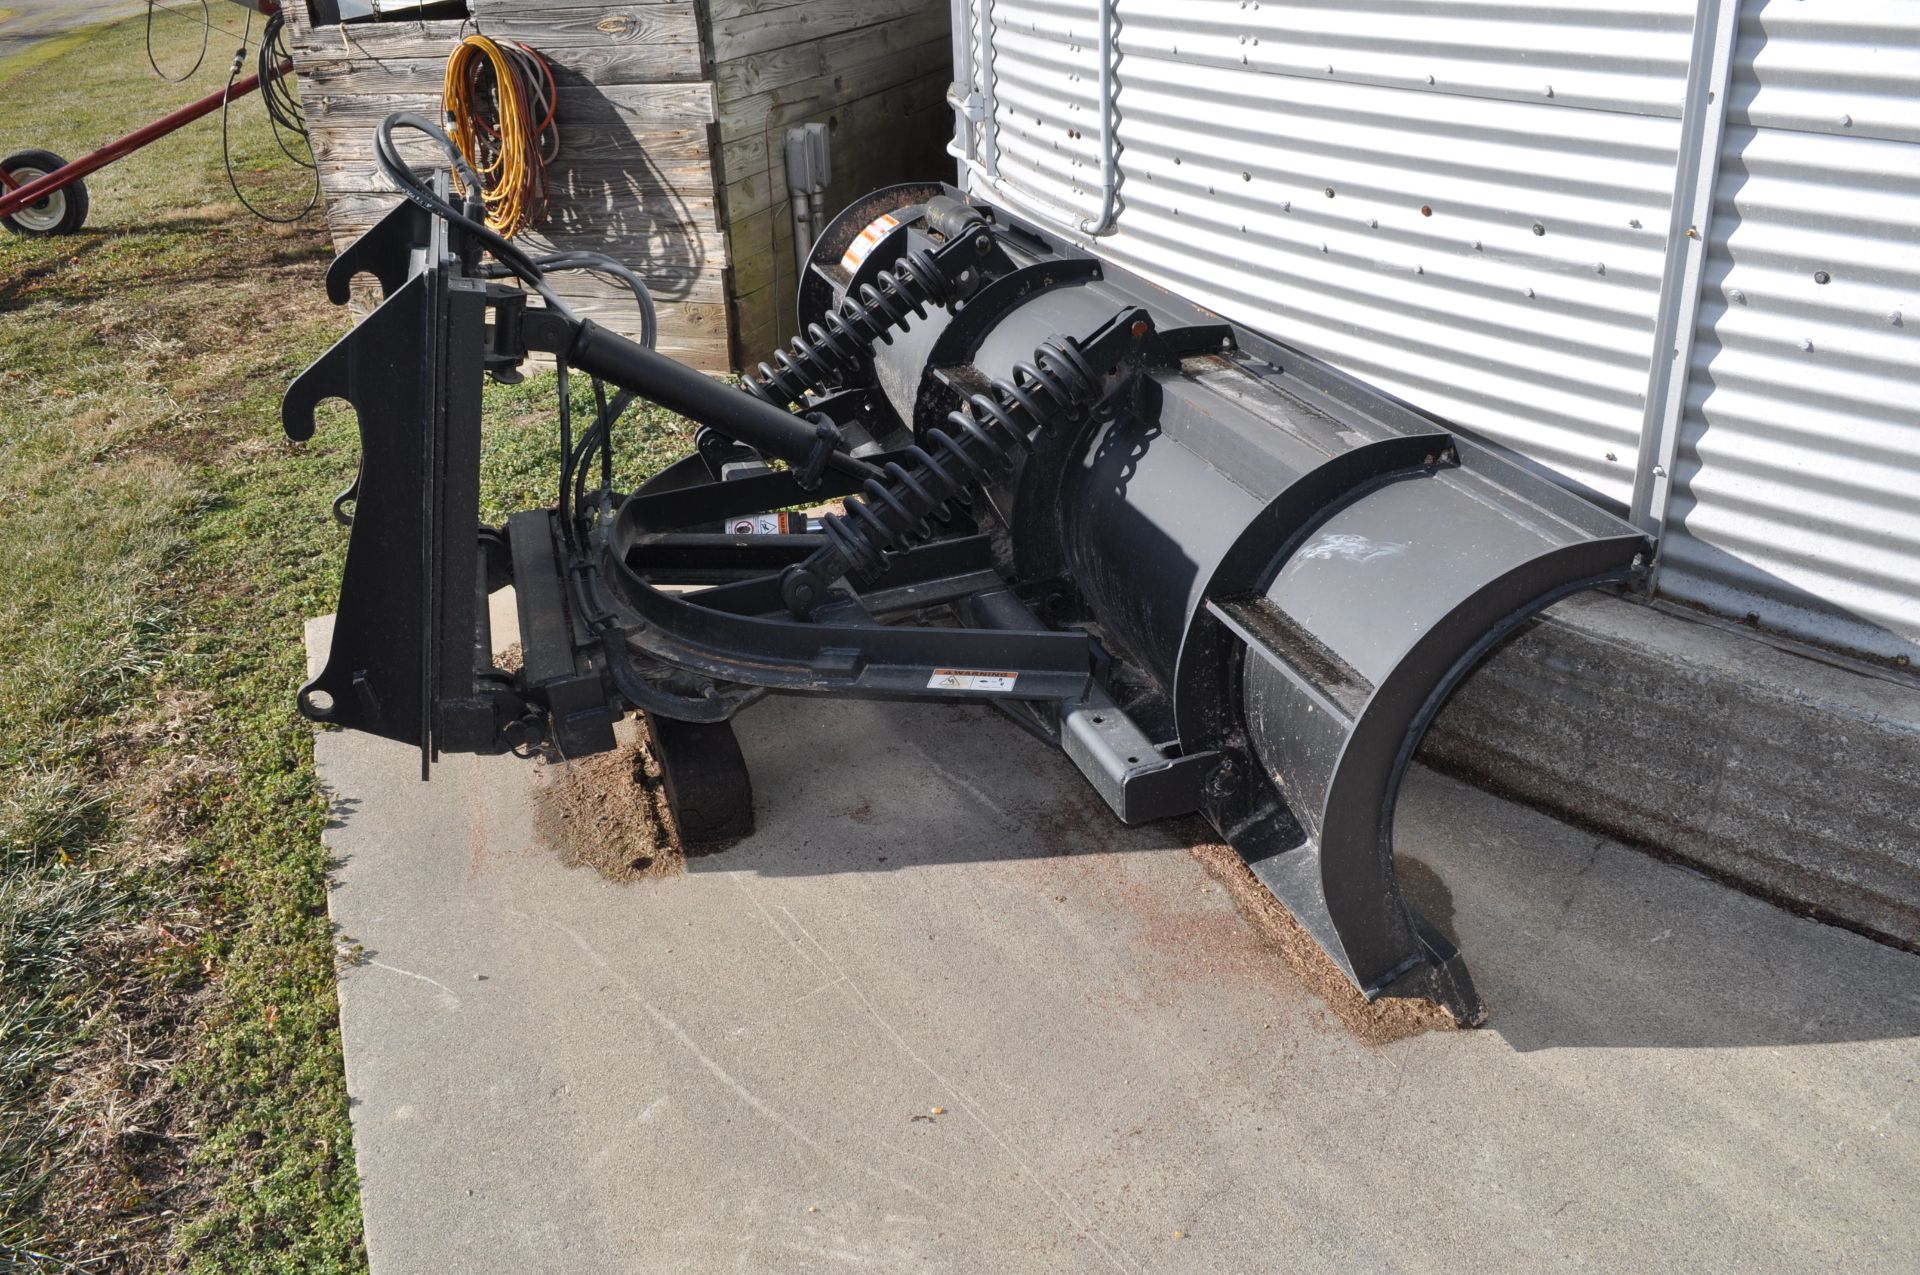 11' JRB snowplow blade for John Deere 310SJ backhoe, Hyd angle, quick attach, spring trip SN 0610- - Image 3 of 5